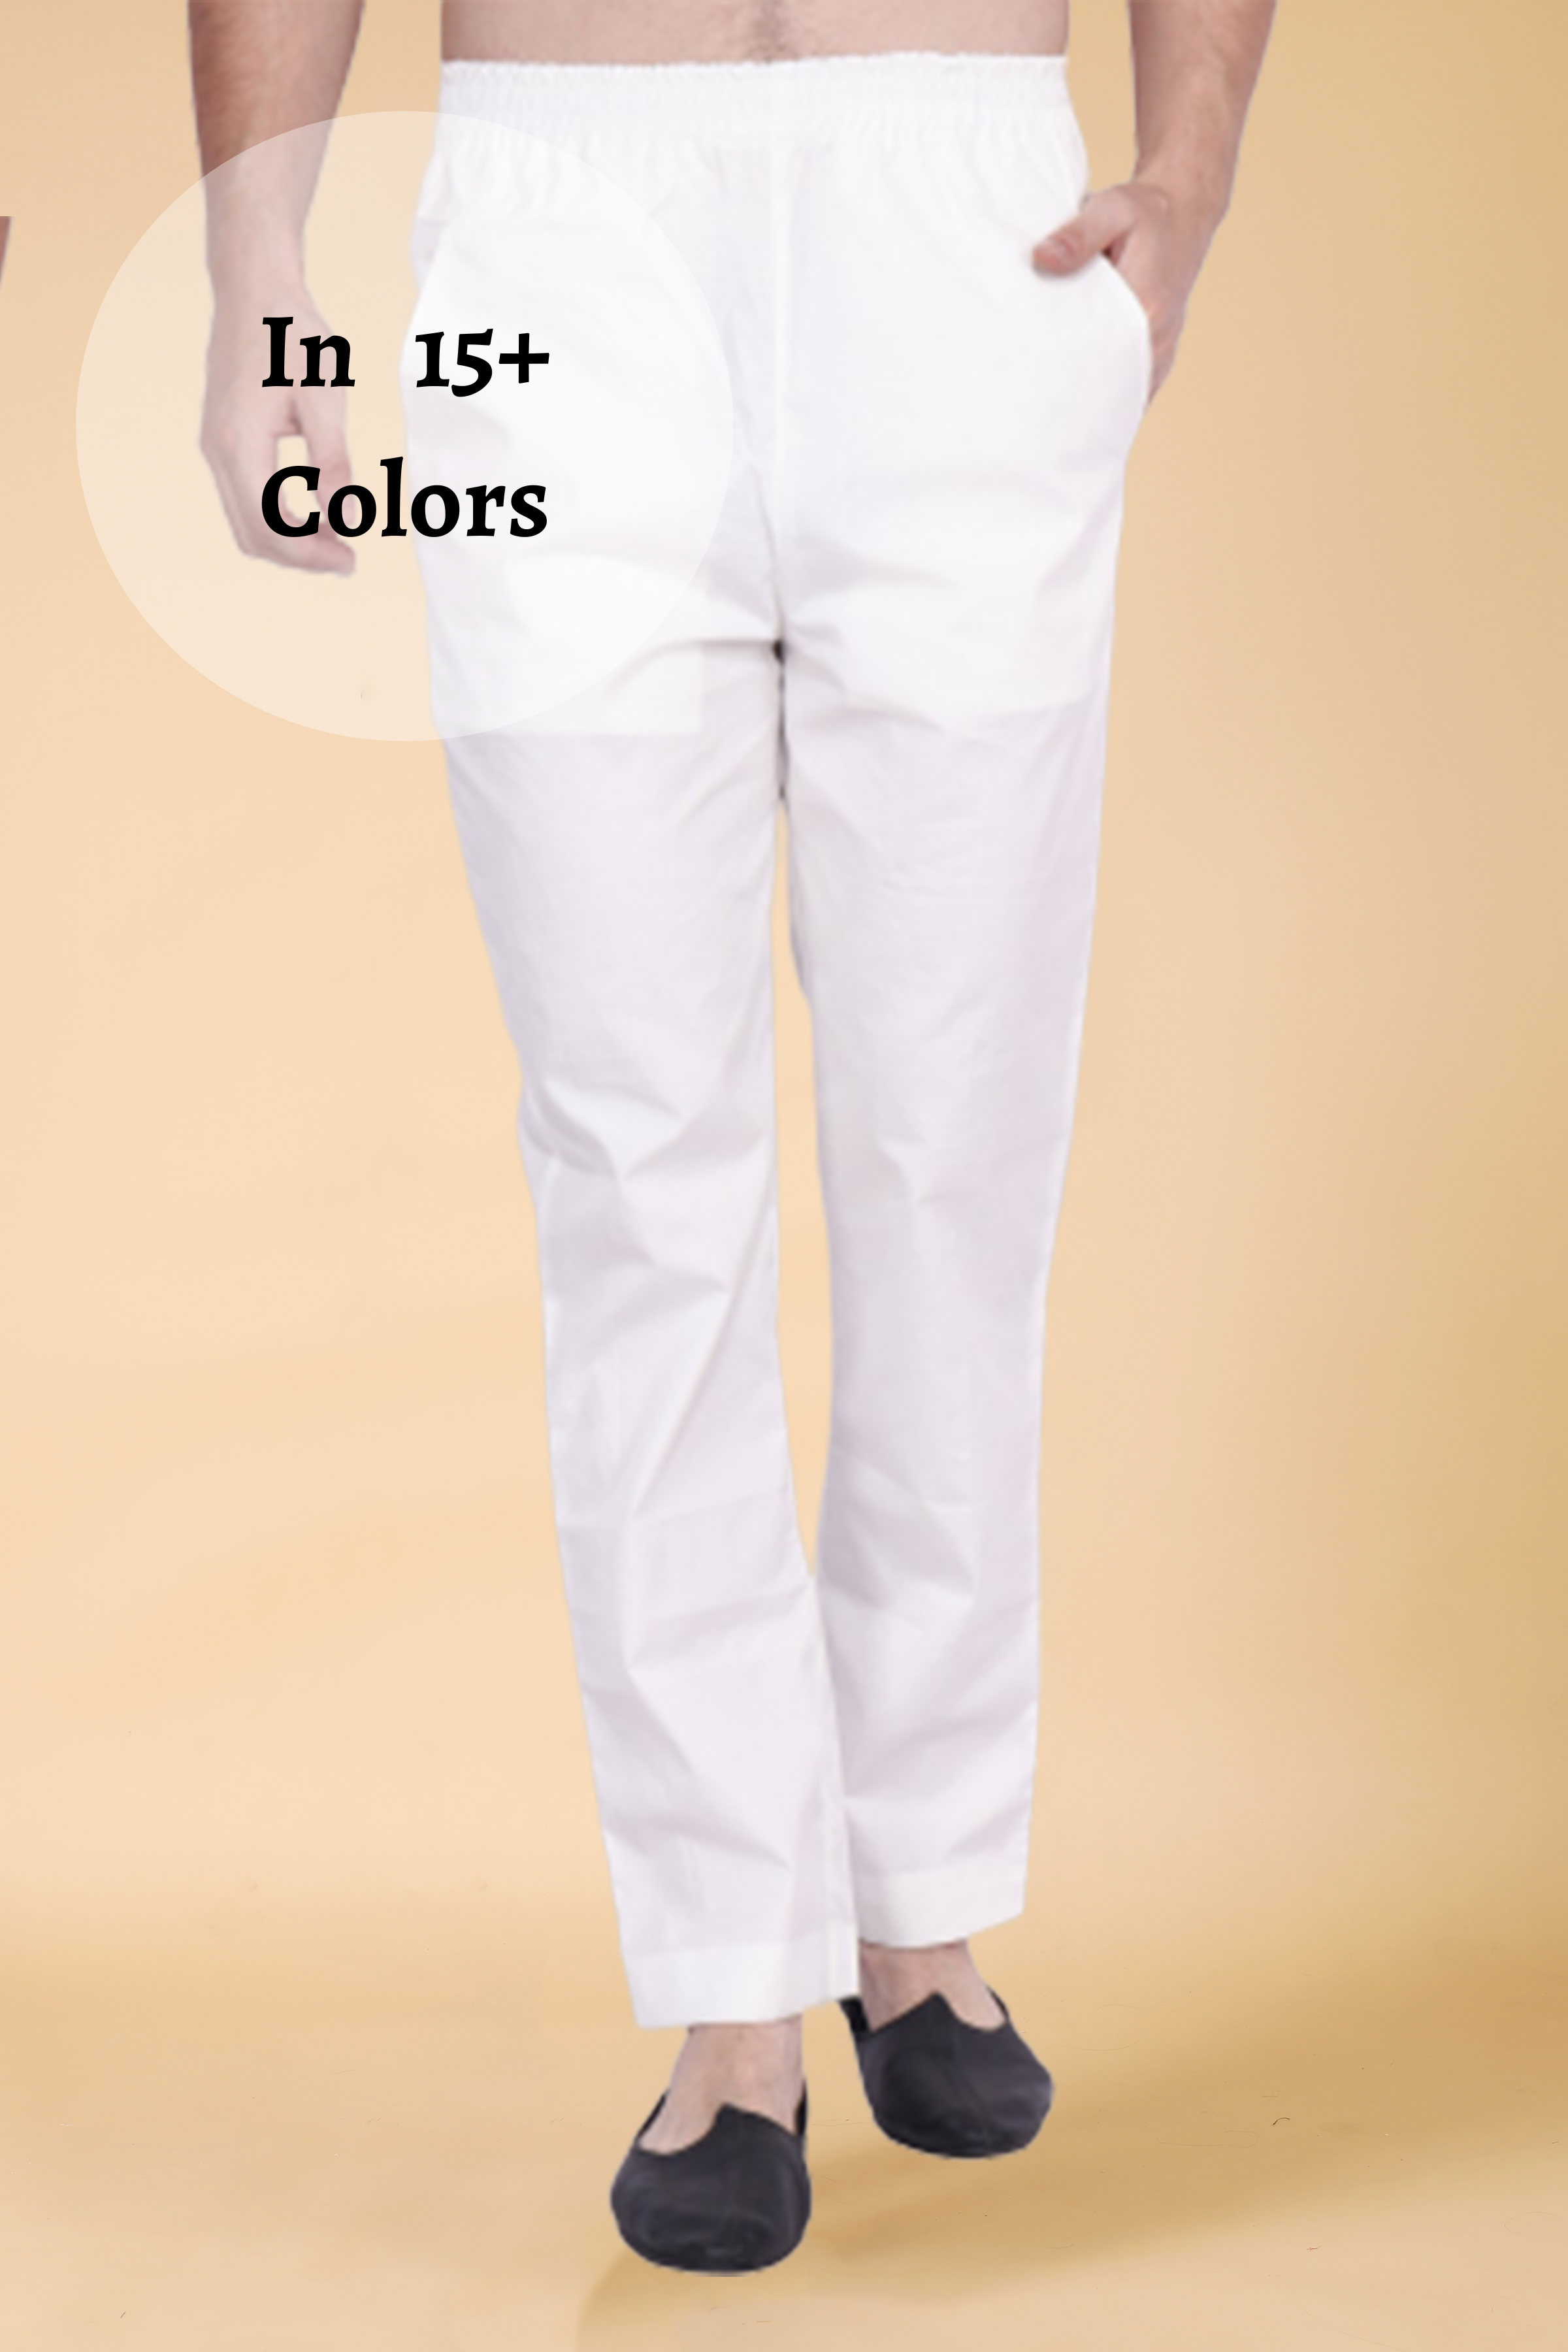 Classy White Pants Outfit With Blazer  White Party Outfits For Ladies   Party Outfit White Outfit